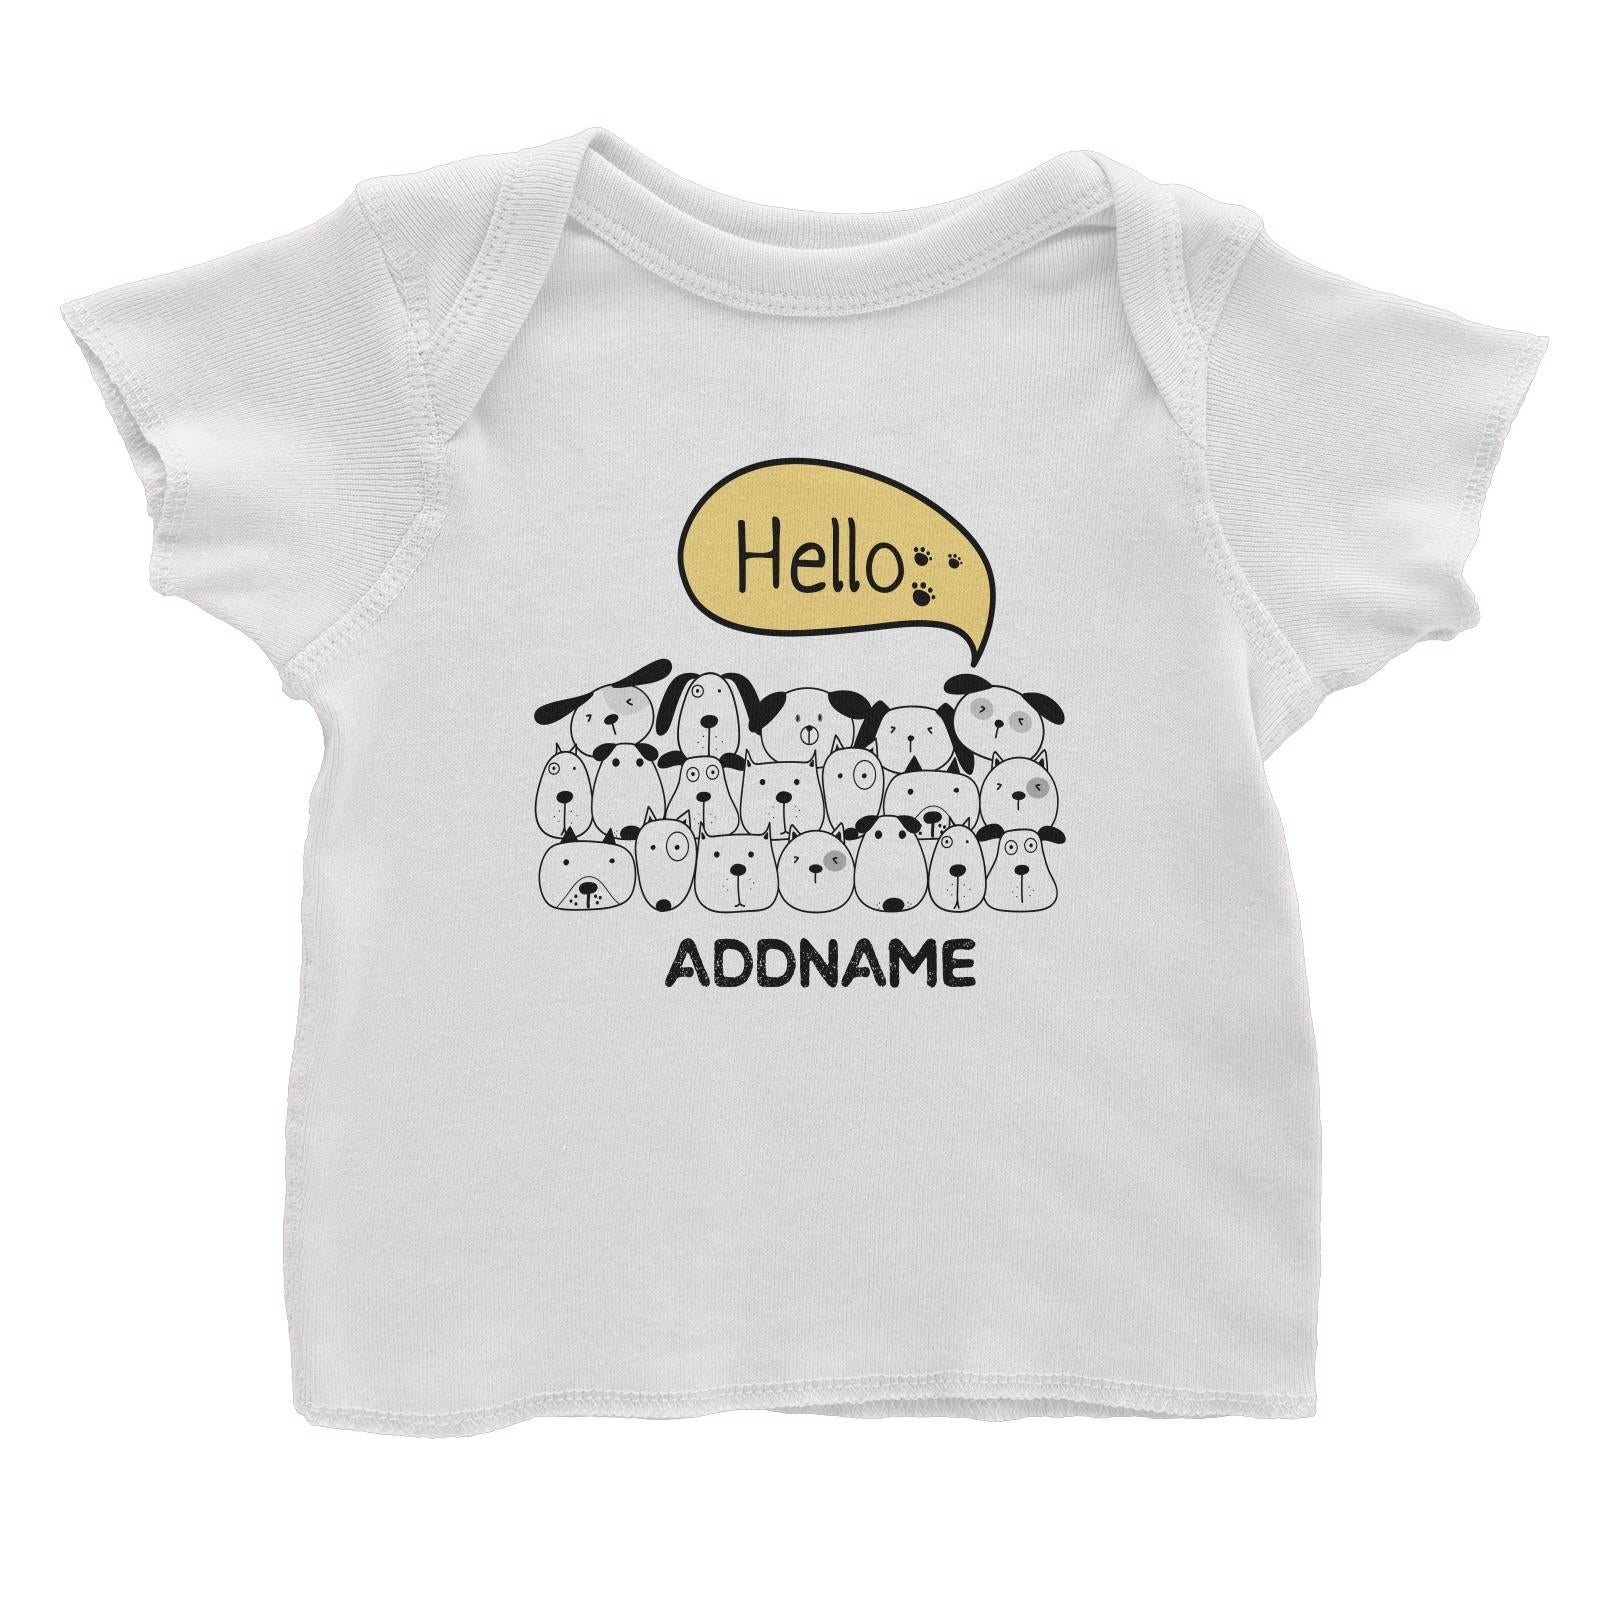 Cute Animals And Friends Series Hello Dogs Group Addname Baby T-Shirt